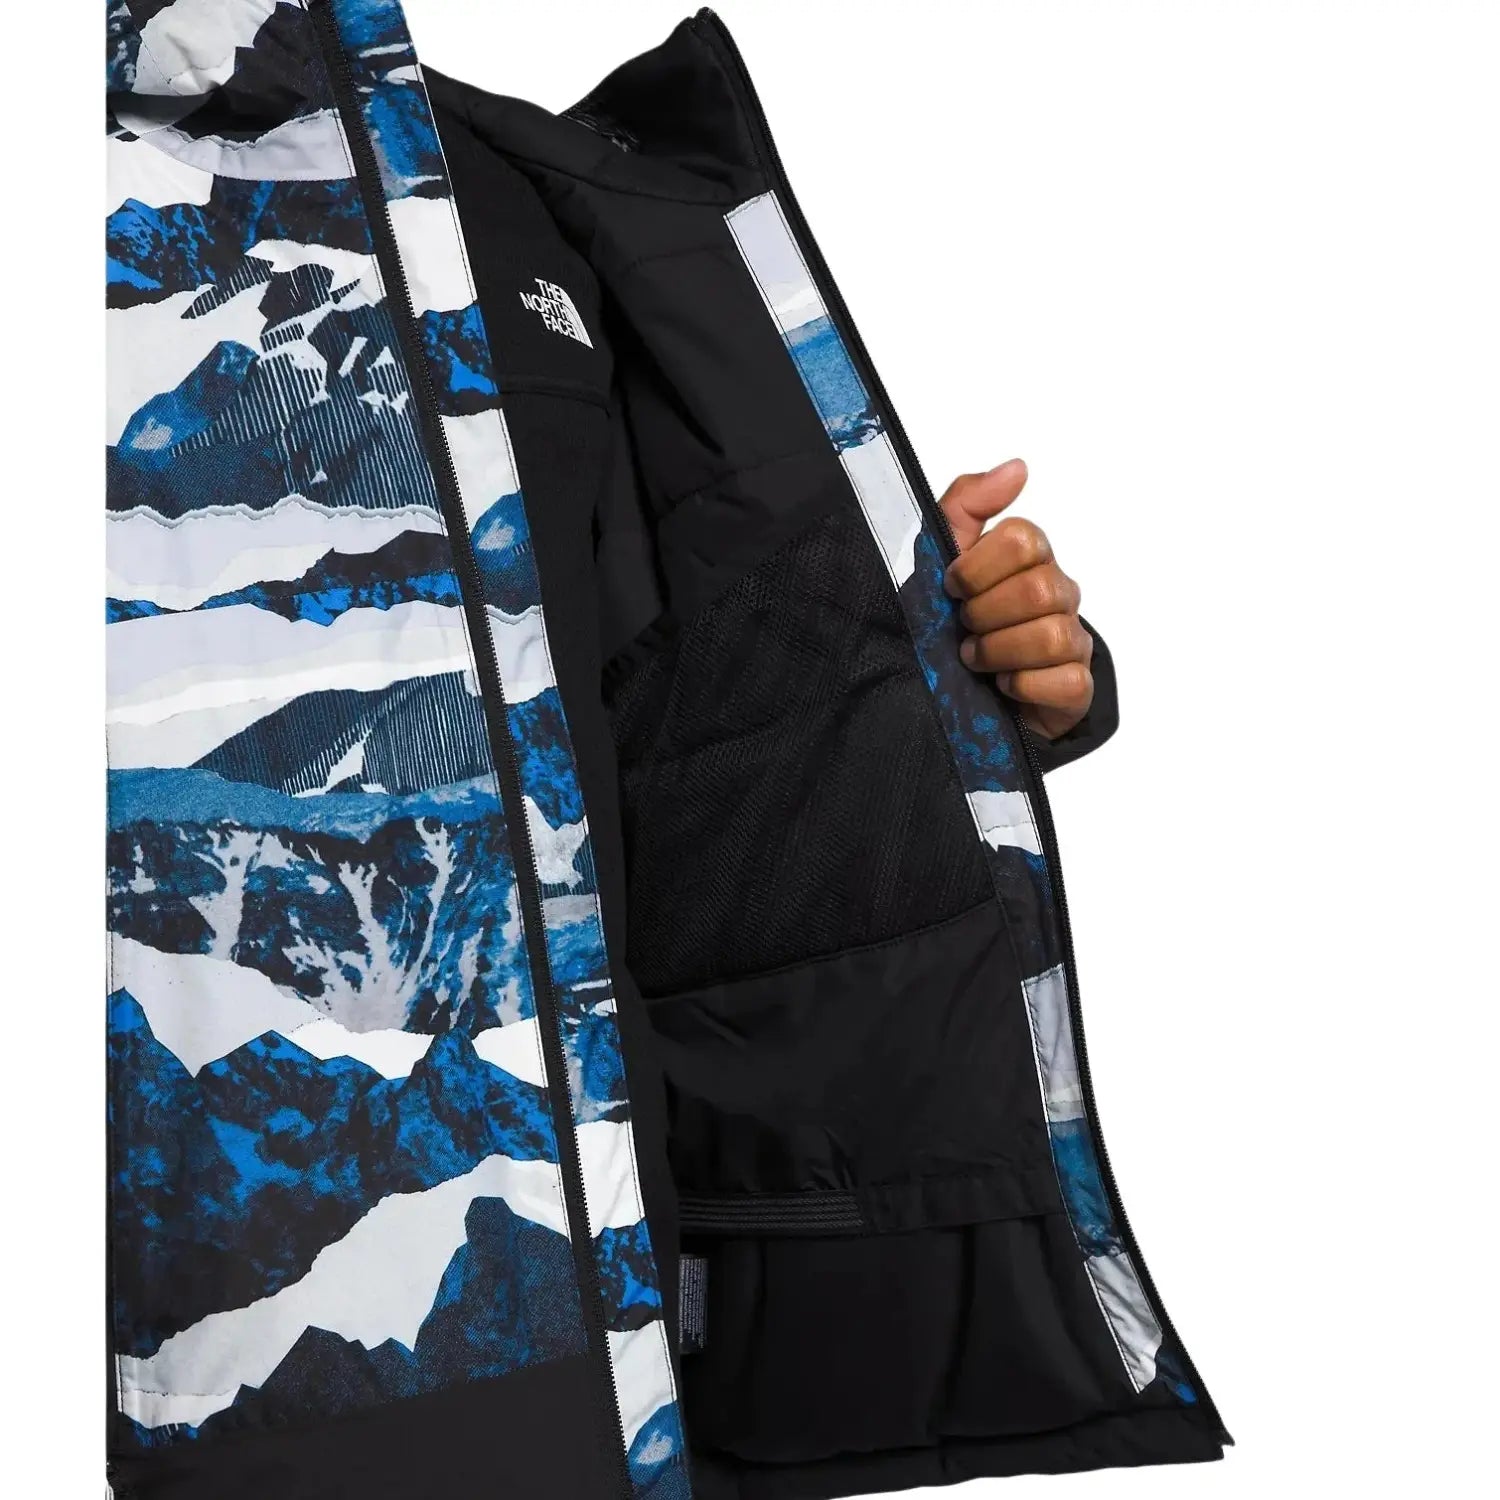 The North Face B's Freedom Insulated Jacket, Optic Blue Mountain Print, inside pocket view on model